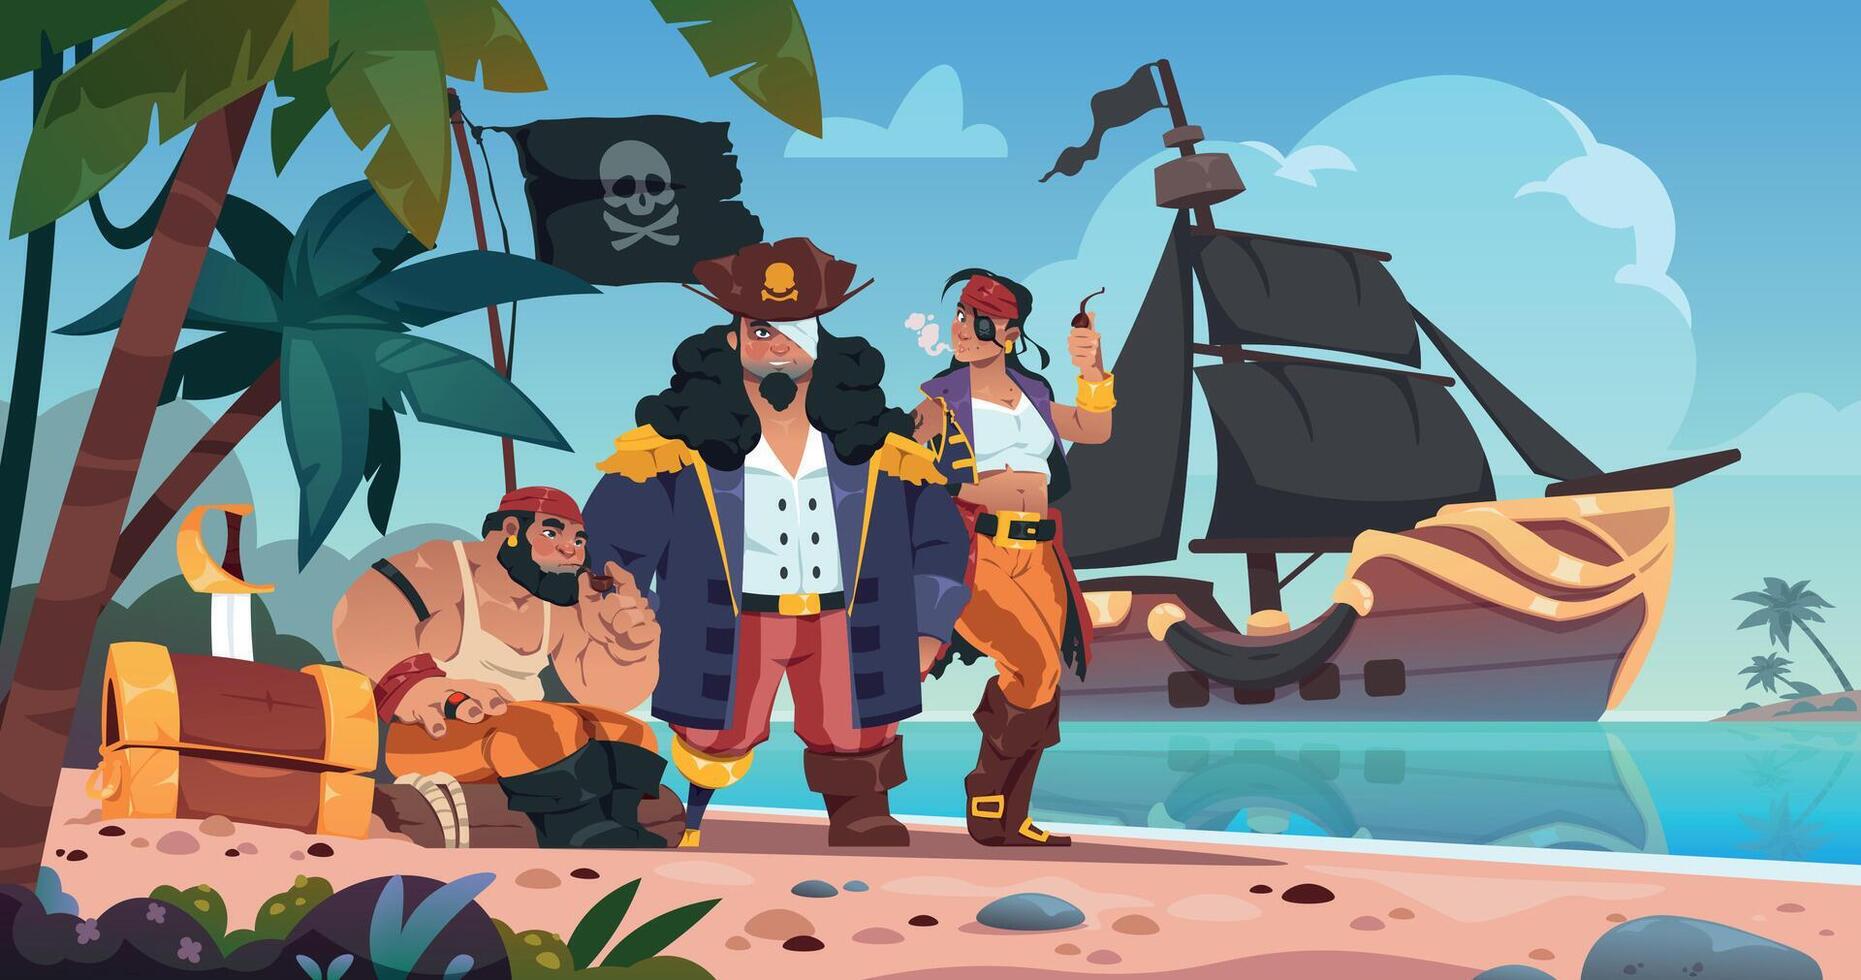 Pirates on island. Cartoon kids background with corsairs and pirate characters on sea beach with treasure chest spyglass sword and cannon. Vector illustration